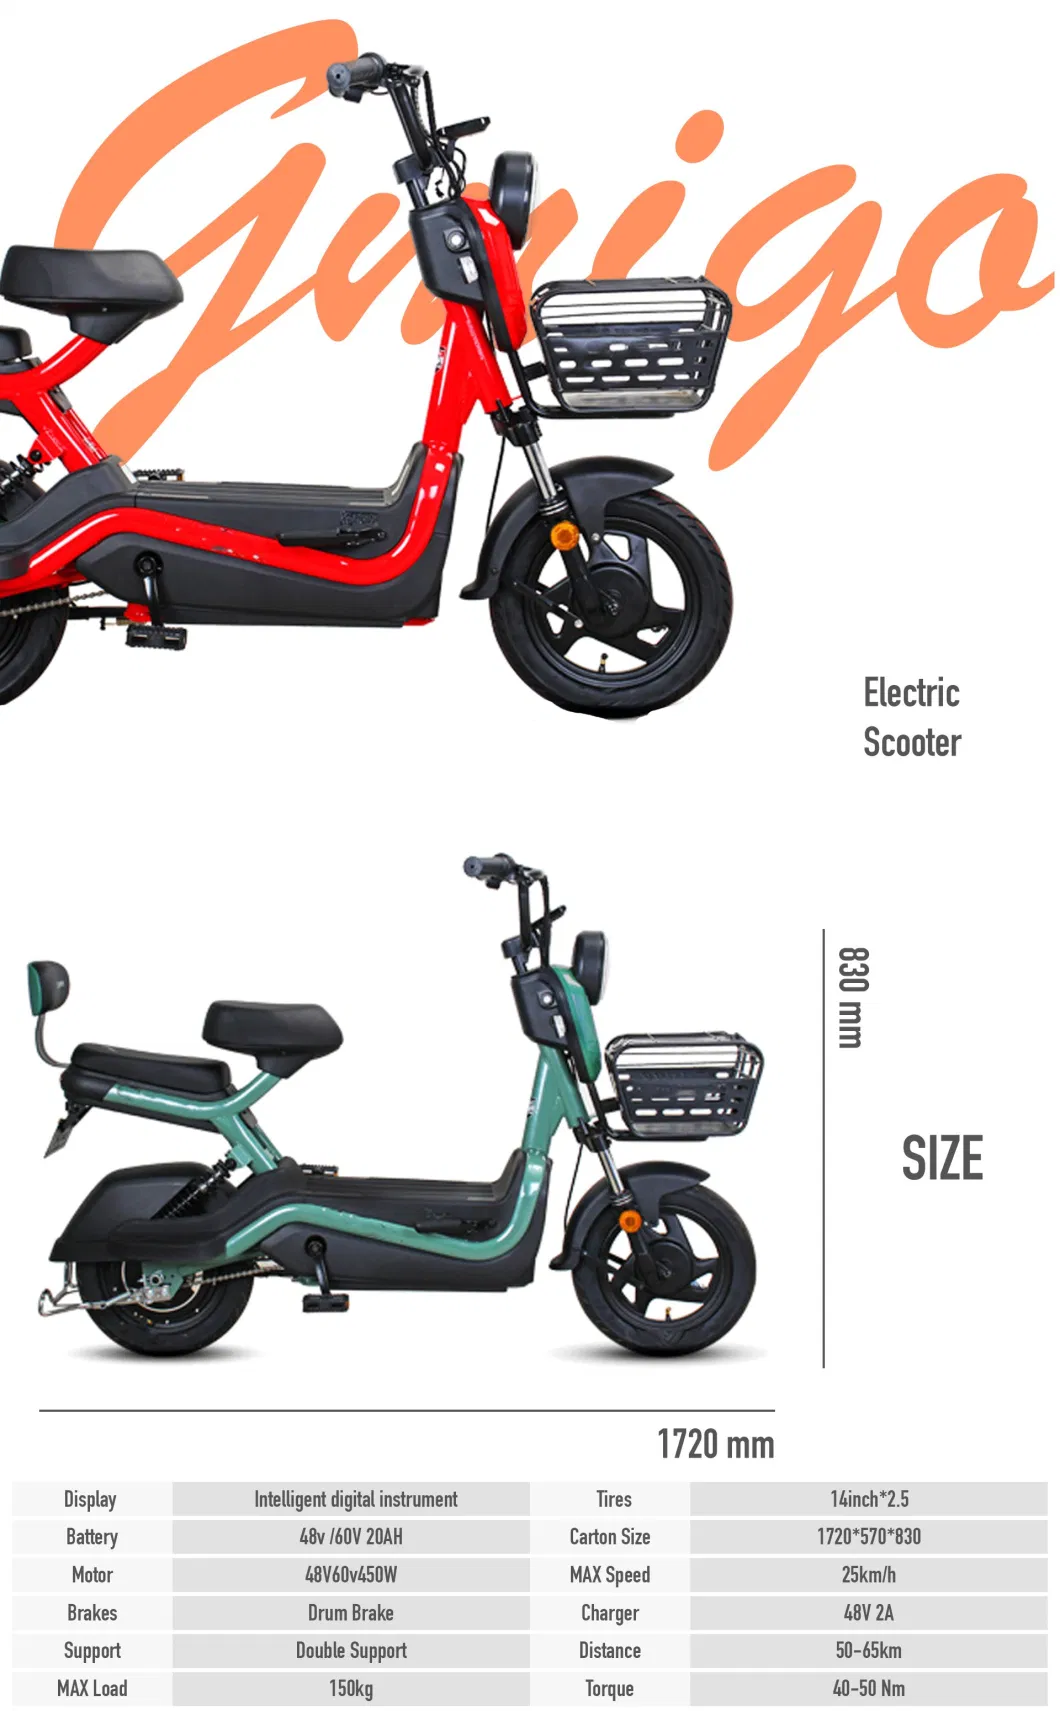 14inch 500W 9.6ah Lithium Small Moped Back Basket Electric Scooter